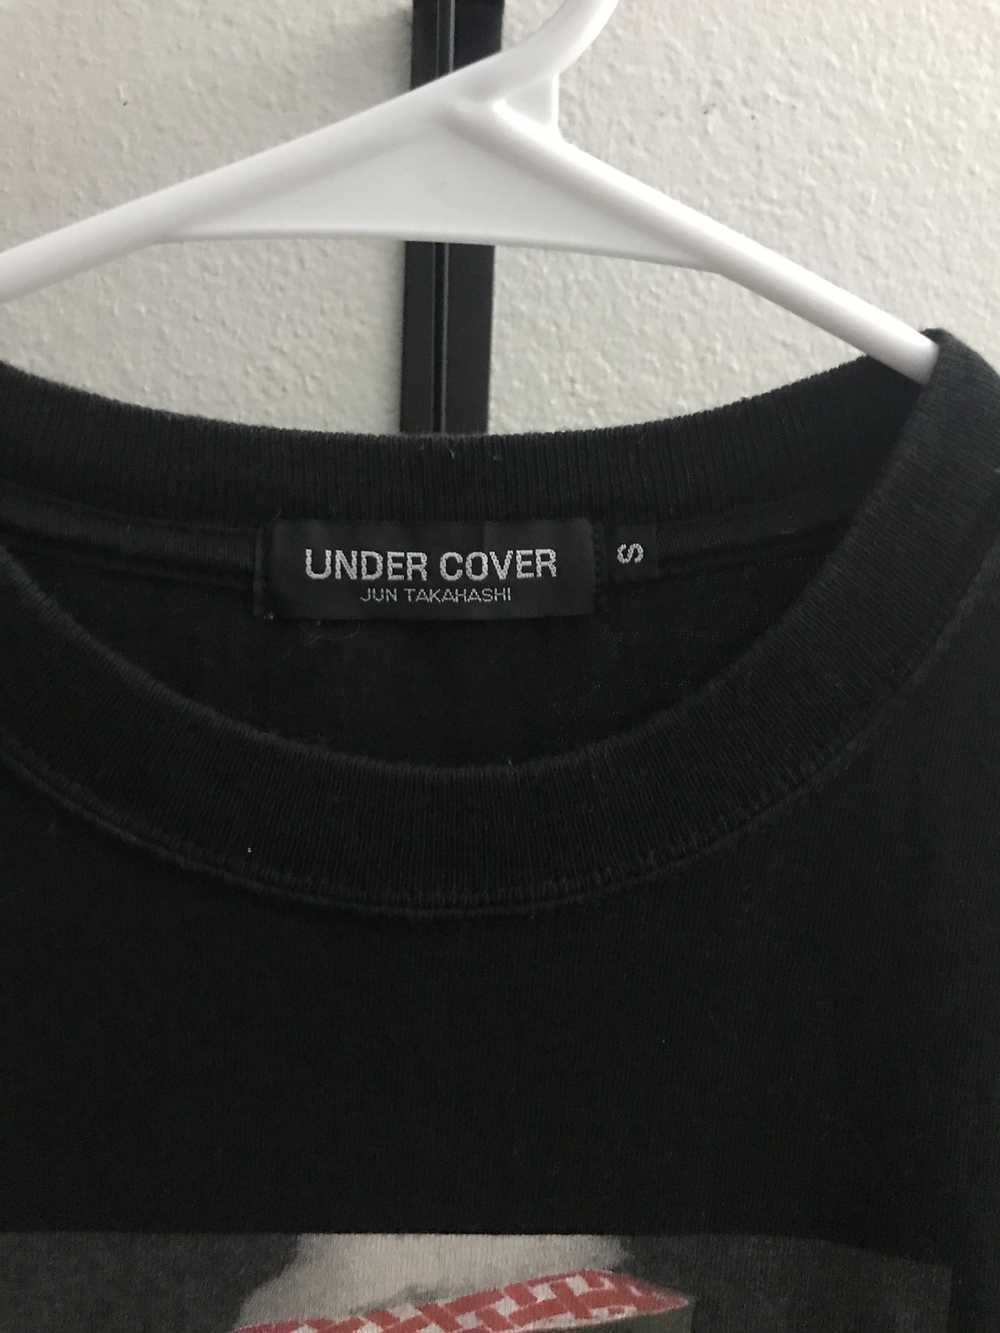 Undercover SS08 Summer Madness Tee in Black - image 3